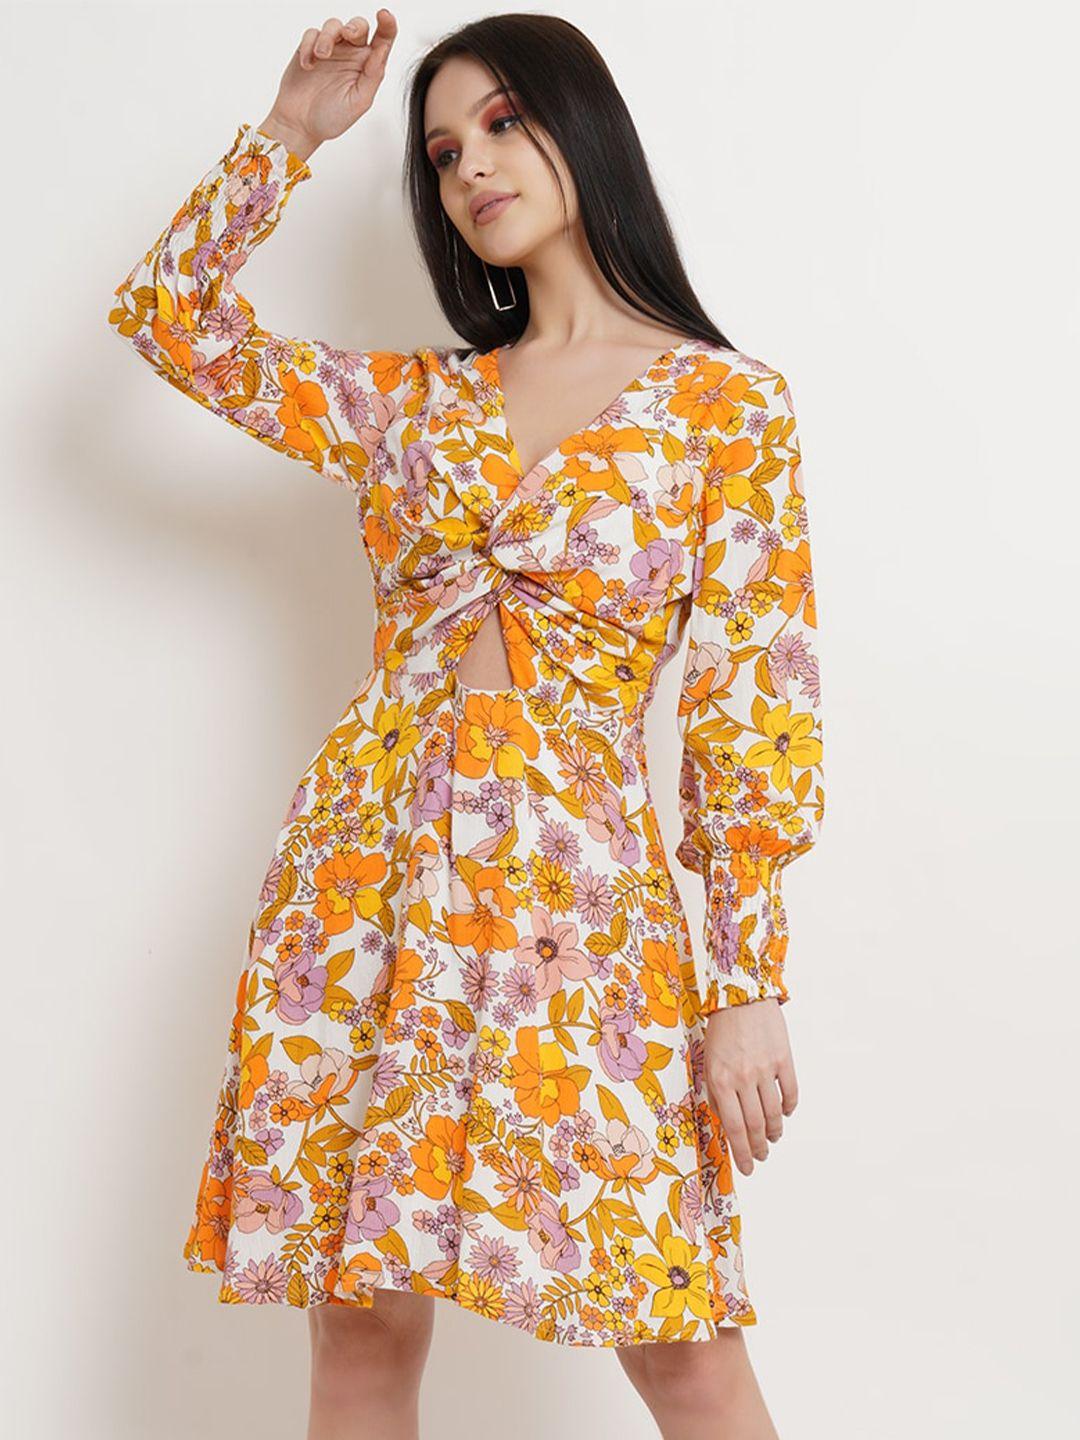 dodo & moa floral printed fit & flare dress